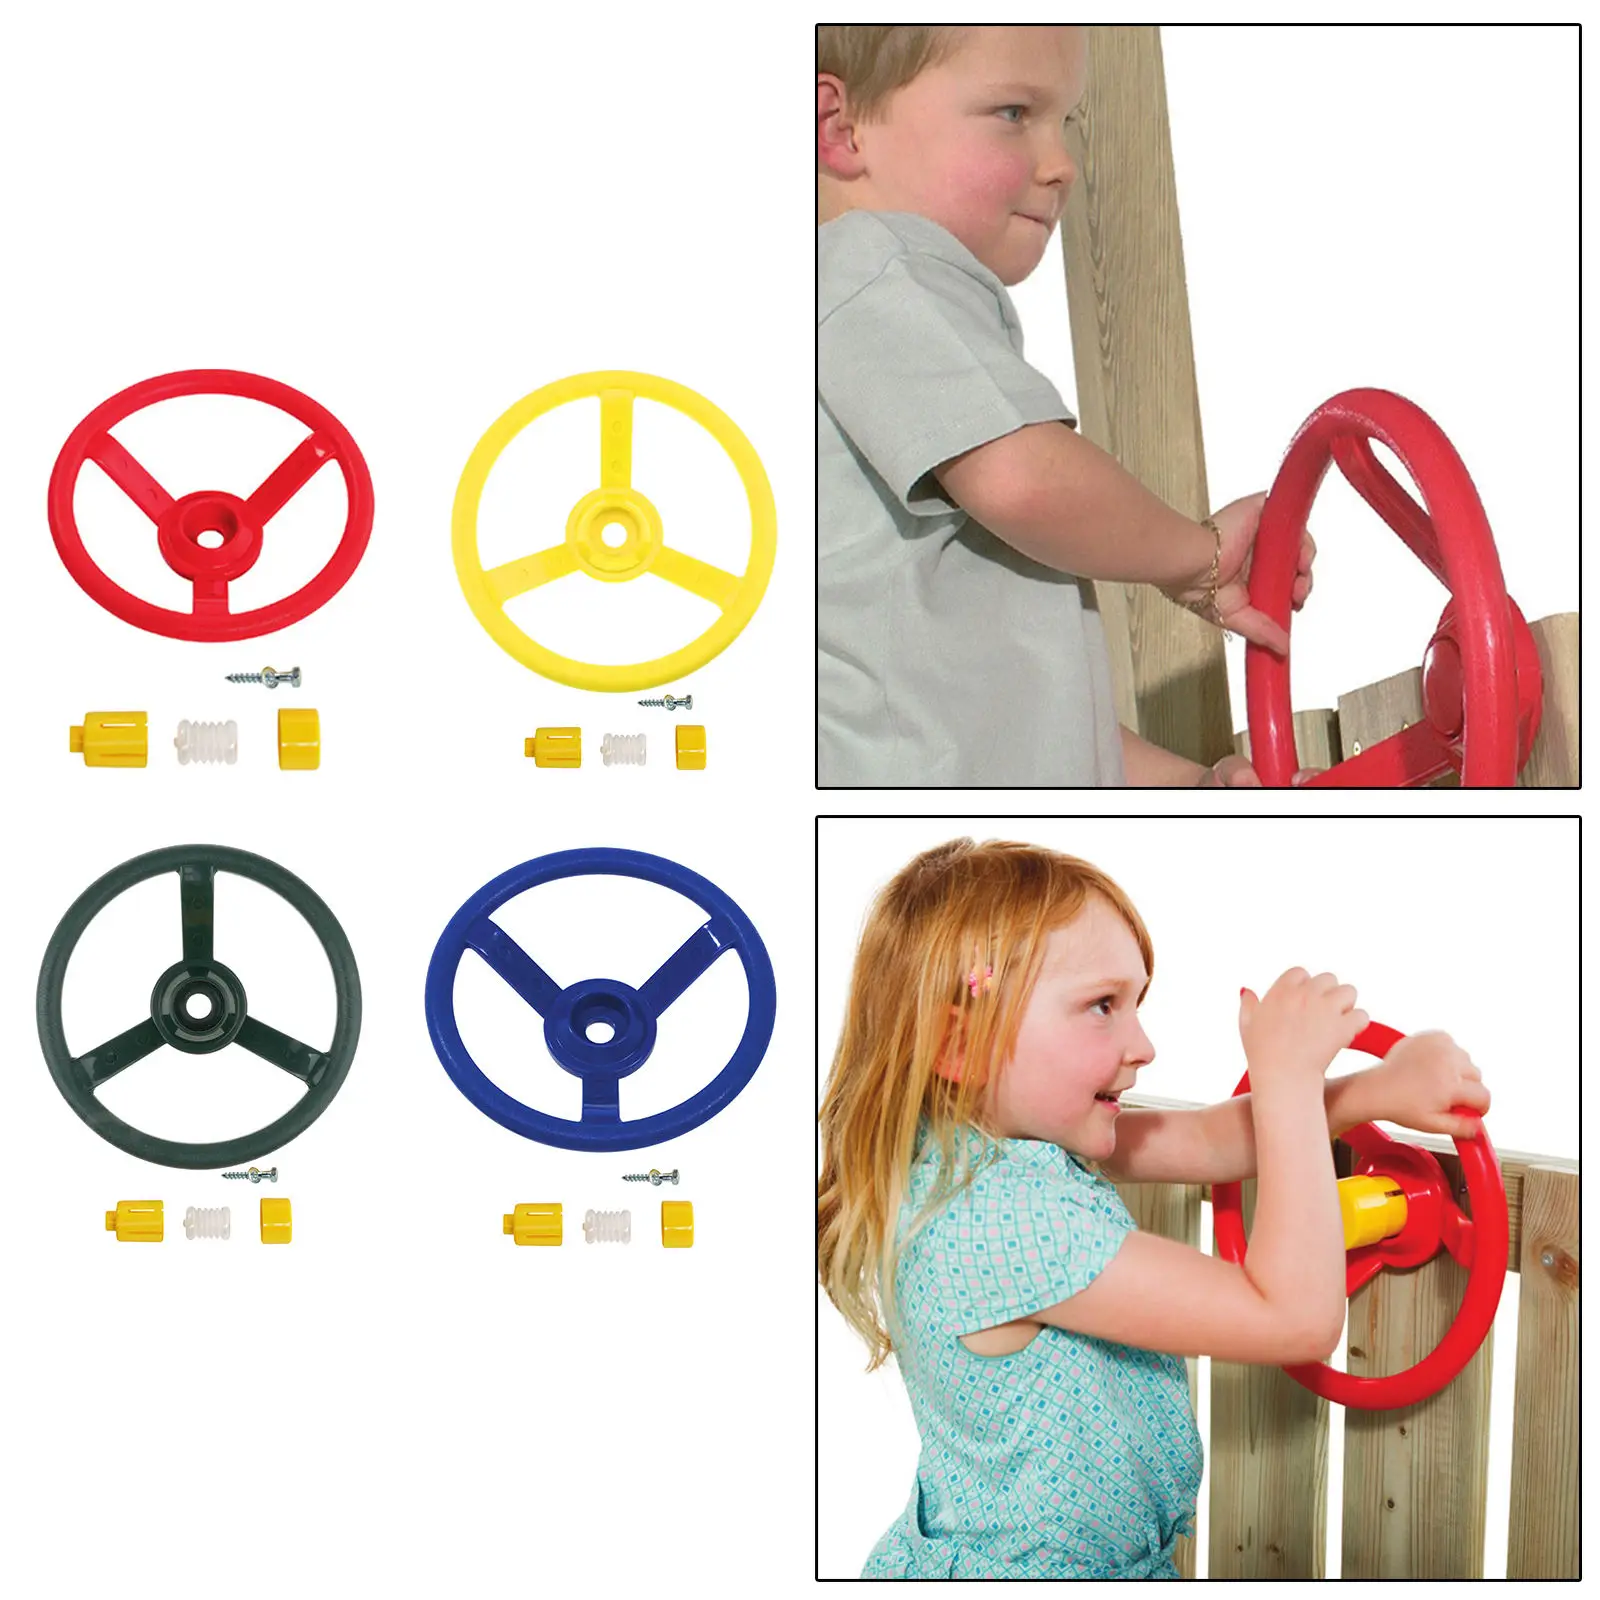 

12" Steering Wheel Toy Playground Accessories Pirate ship Wheel for Backyard Playground Outdoor Playhouse Treehouse Swing Set